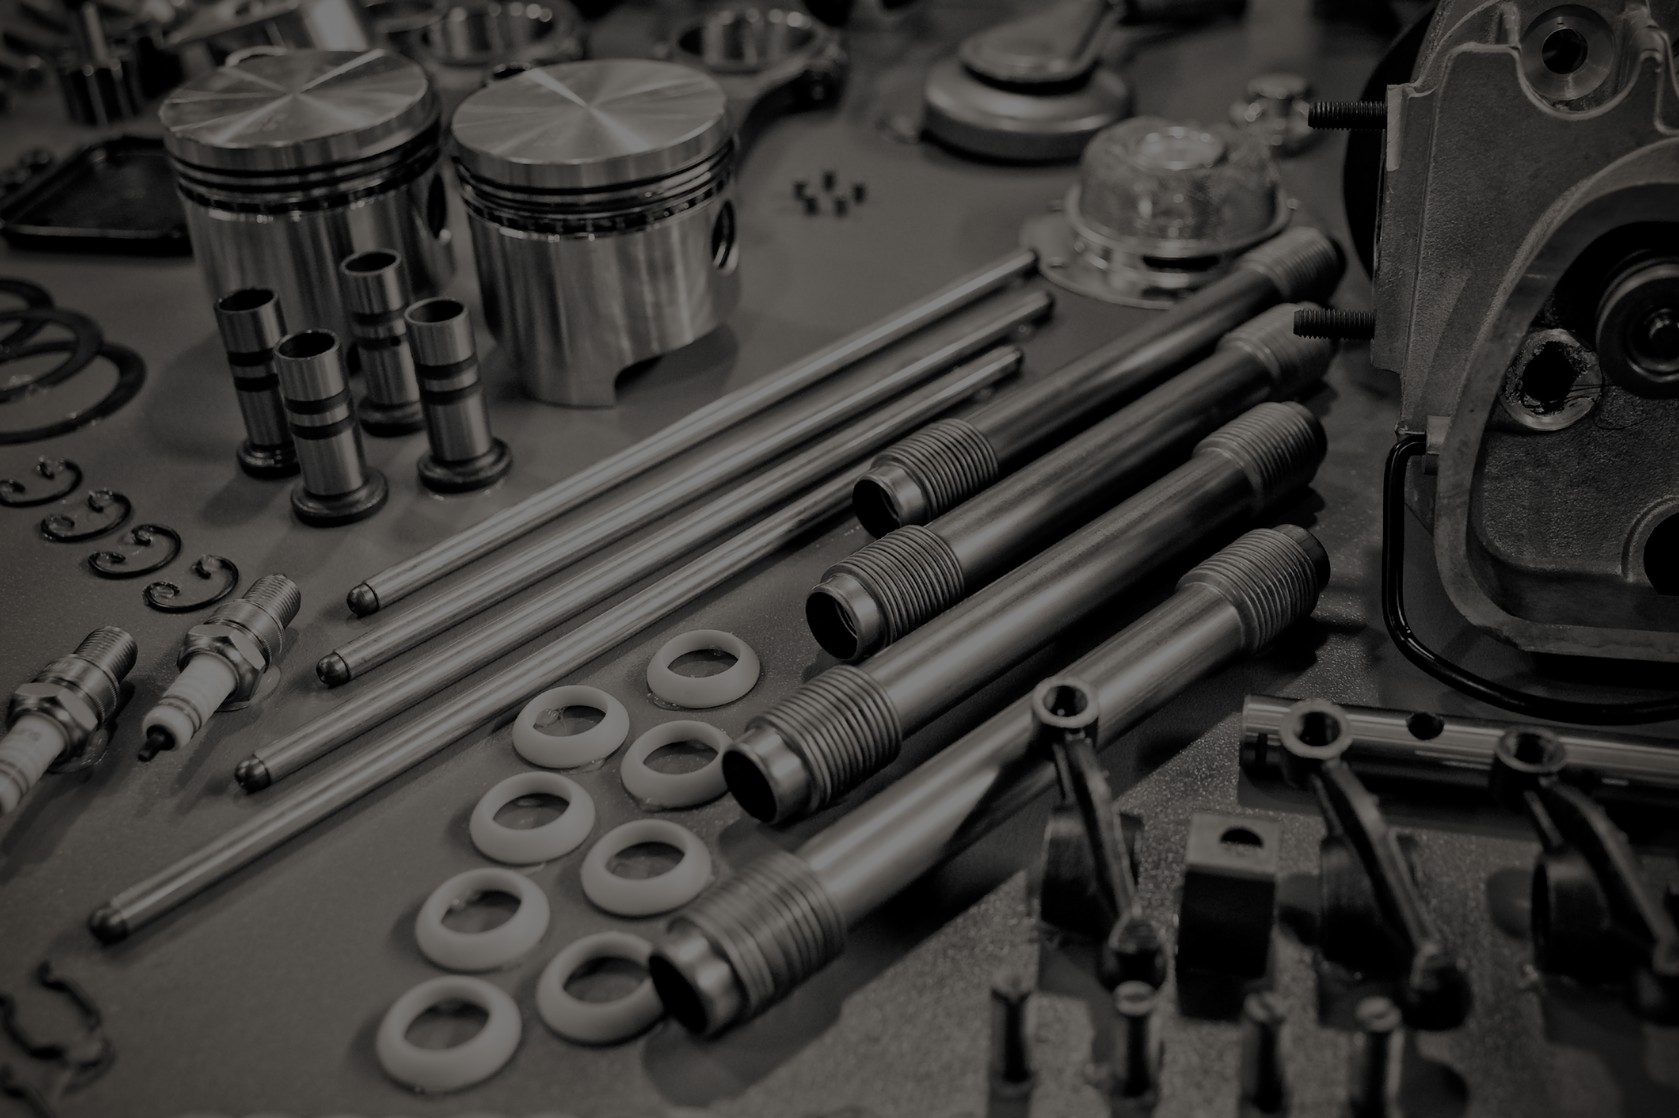 9308201 – collection of precision auto engine parts laid out in a workshop